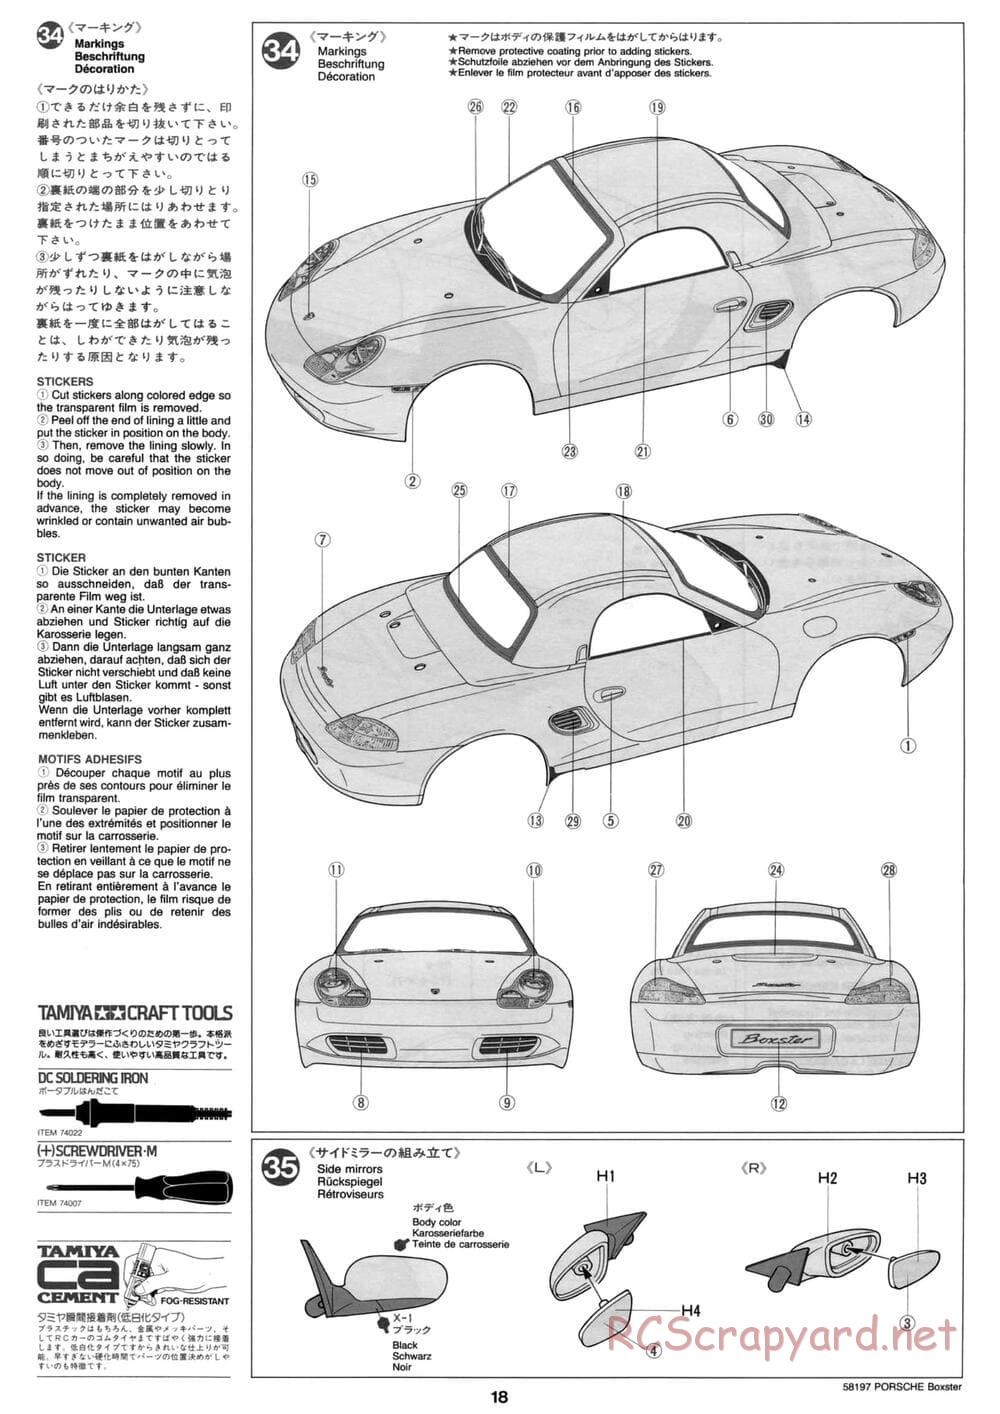 Tamiya - Porsche Boxster - M02L Chassis - Manual - Page 18